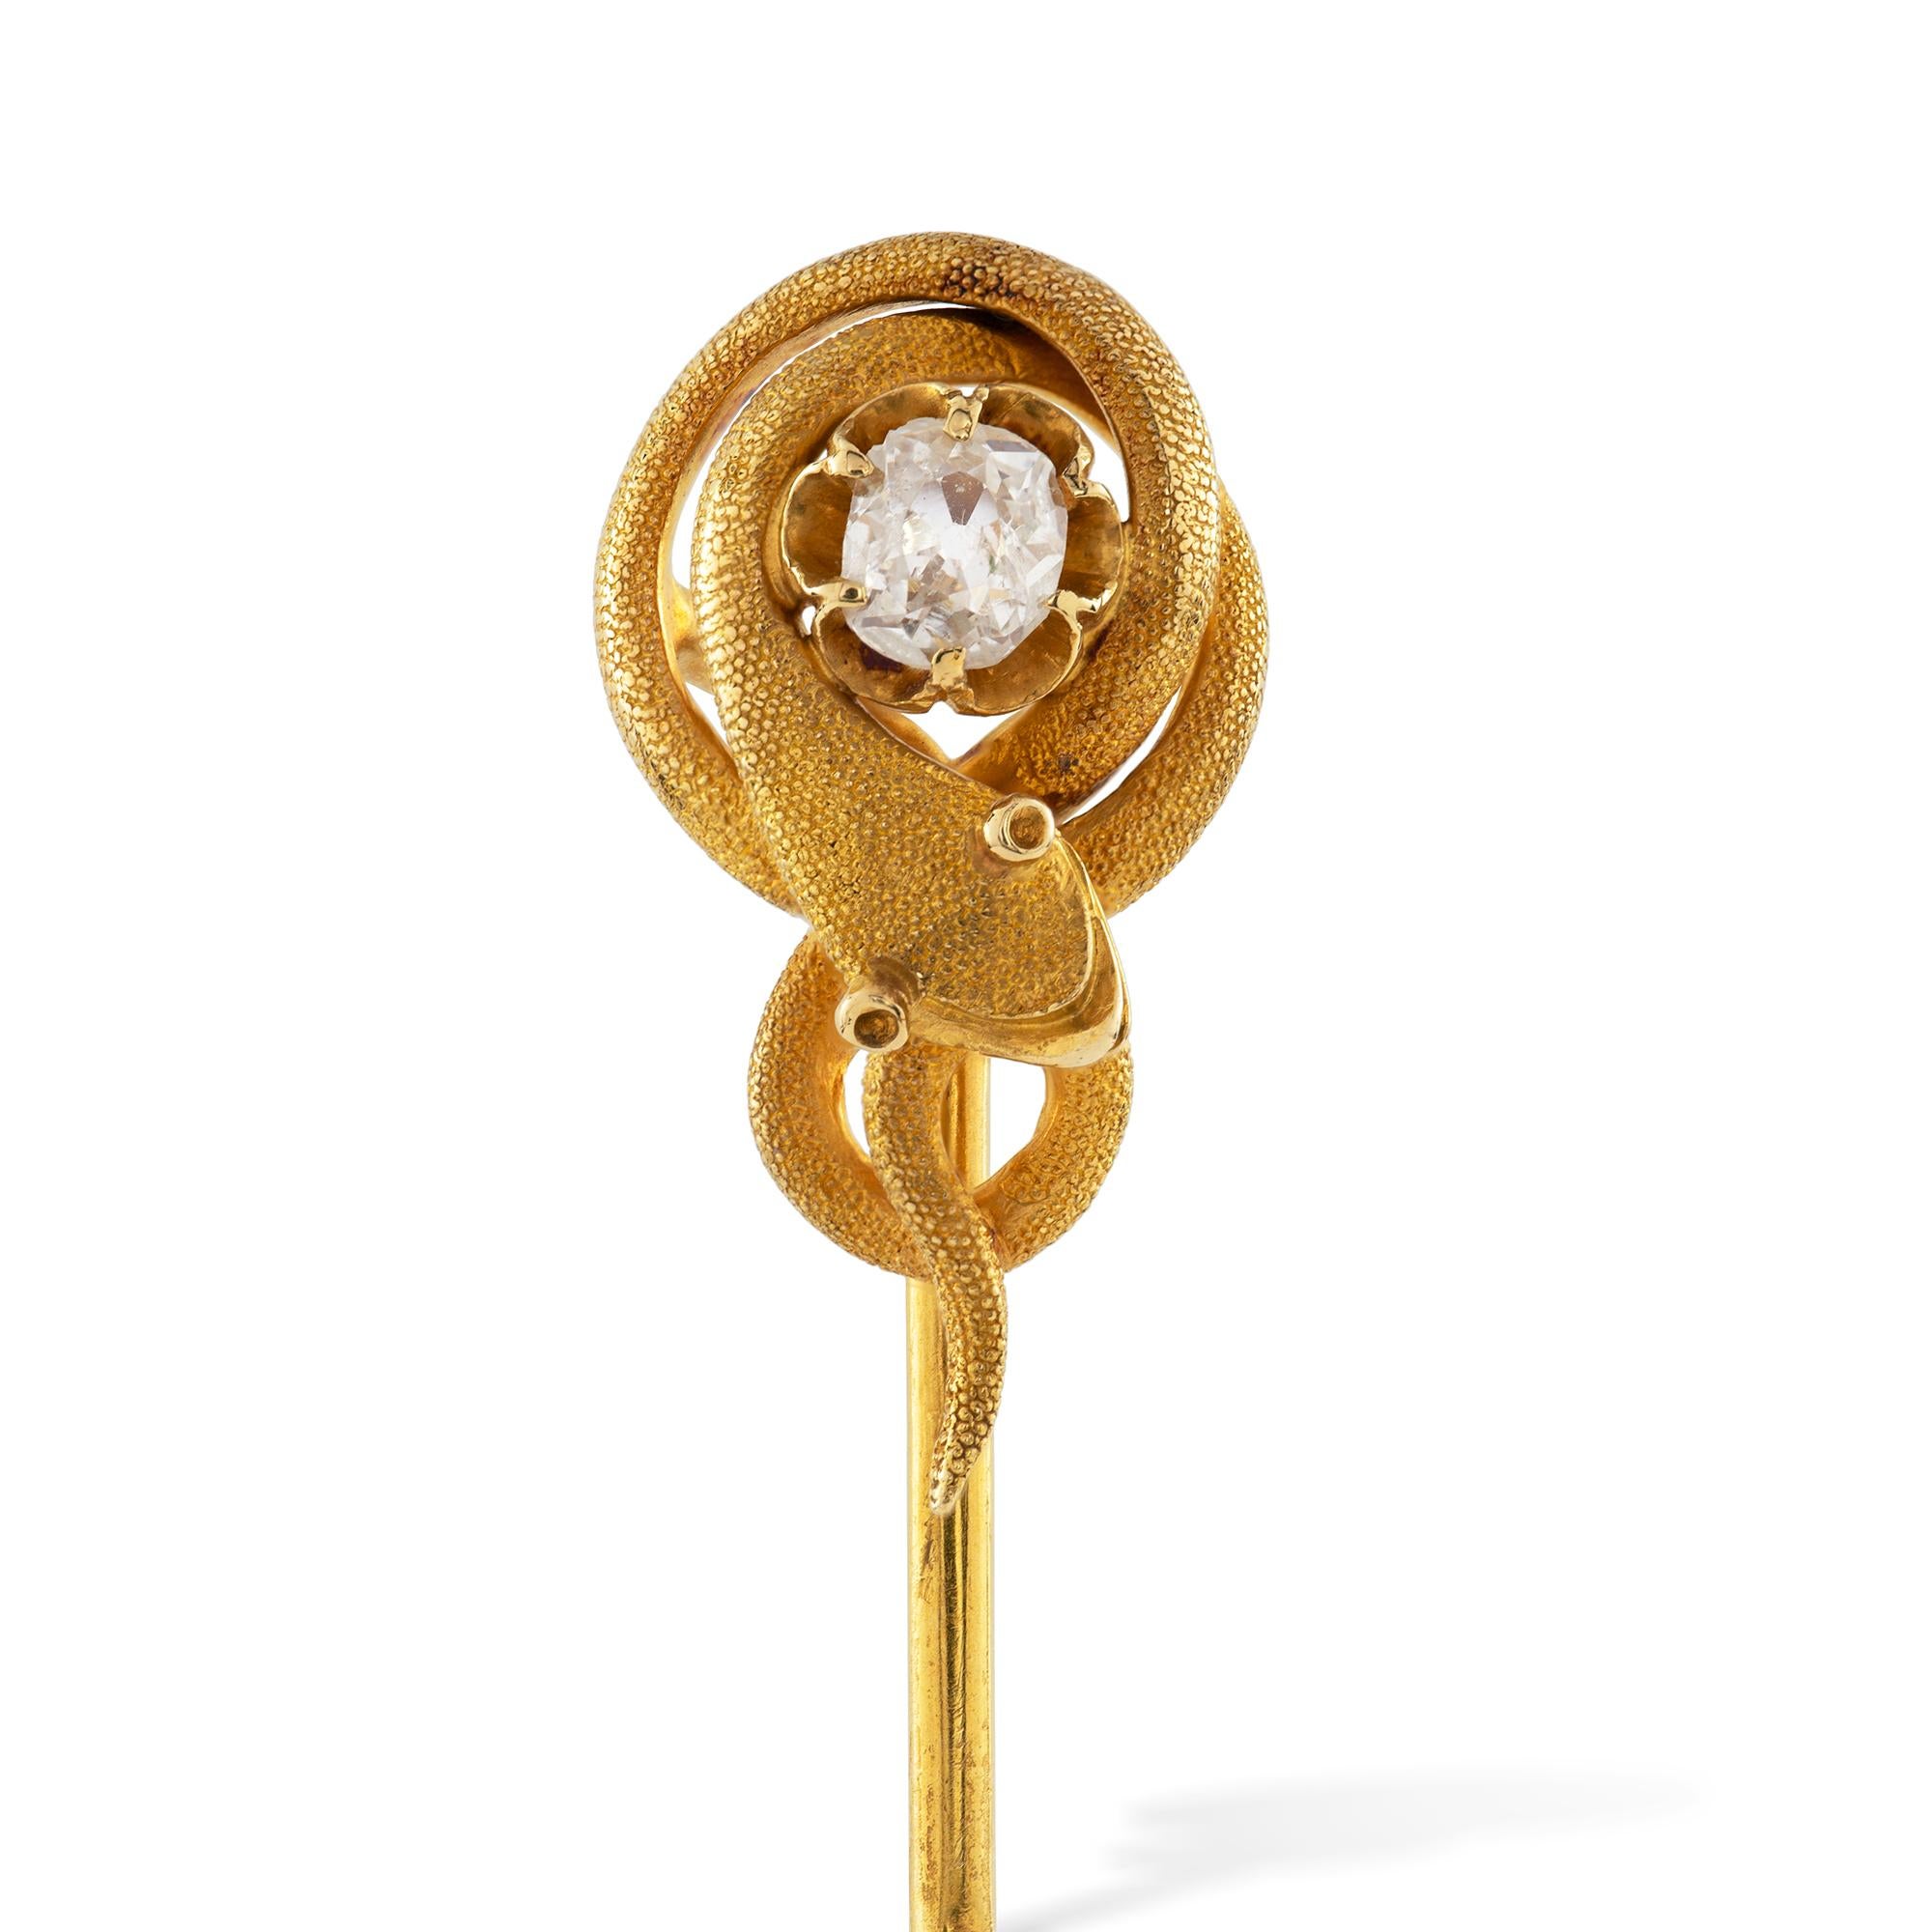 A Victorian snake gold stick-pin, the old European-cut diamond weighing approximately 0.3 carats surrounded by a coiled gold snake with textured finish, all in 18ct gold, to yellow gold stick pin, circa 1880, the jewelled part measuring 2.2cm long,